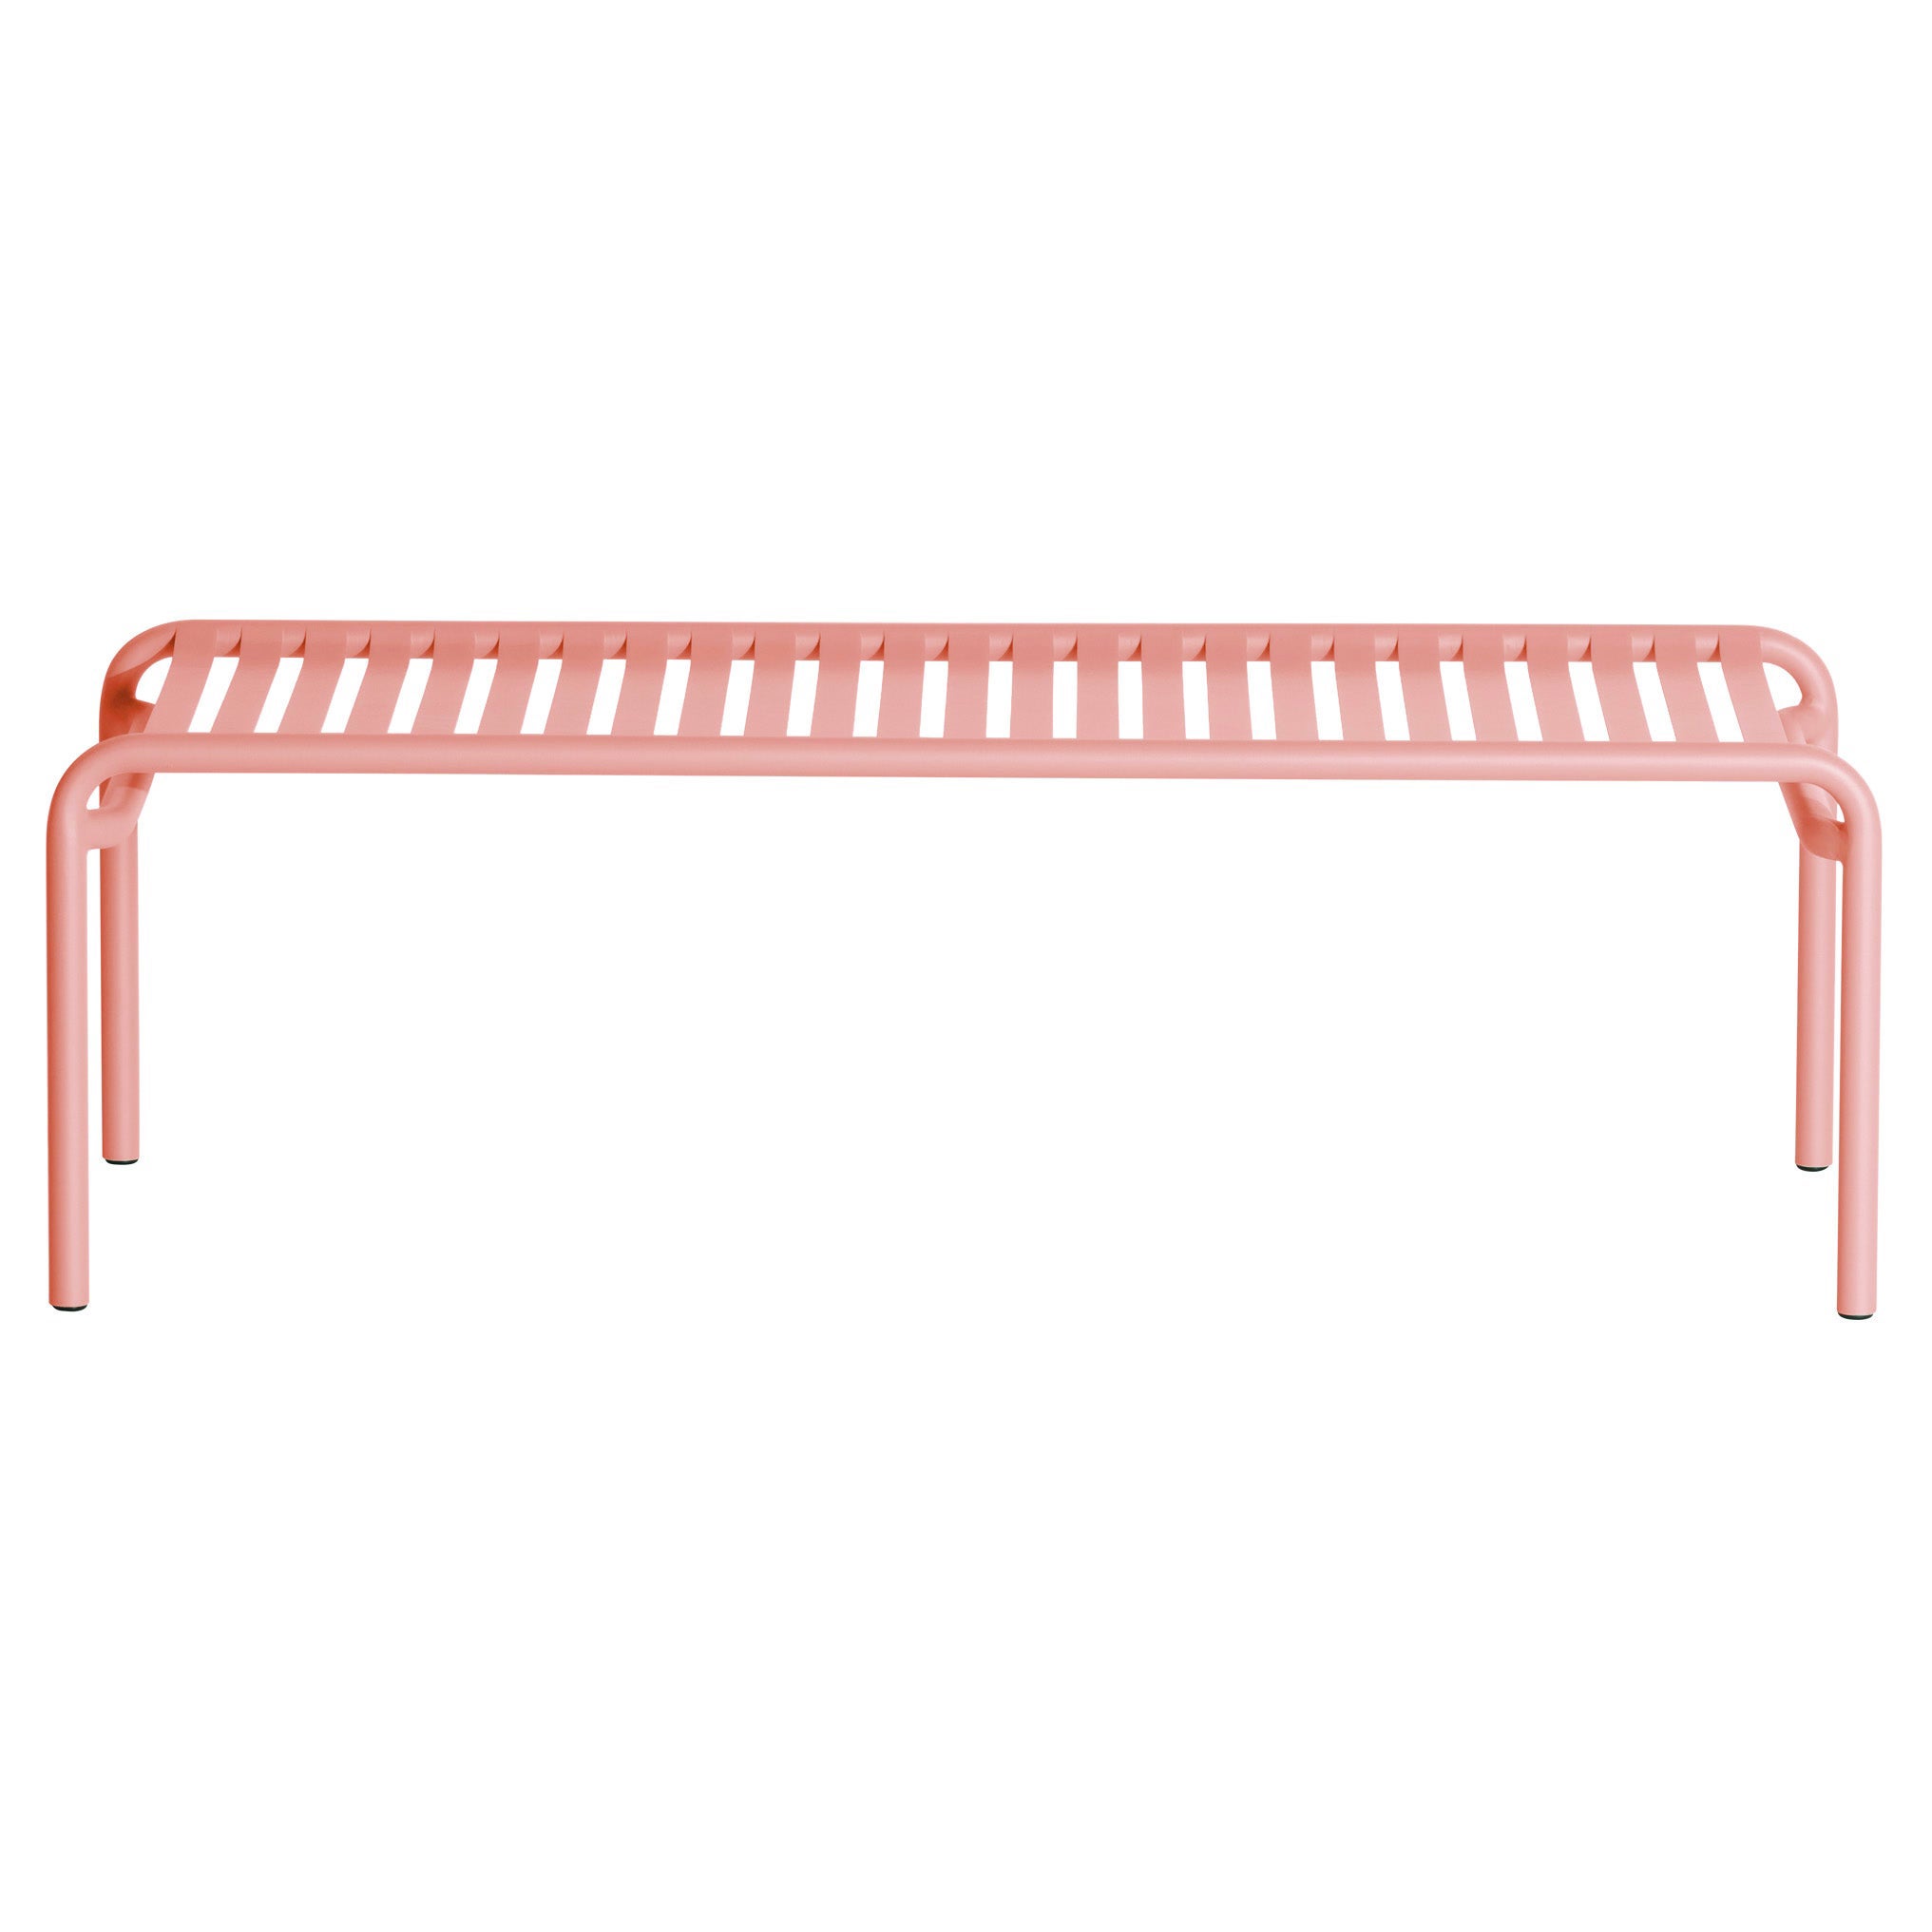 Petite Friture Week-End Long Coffee Table in Blush Aluminium, 2017 For Sale